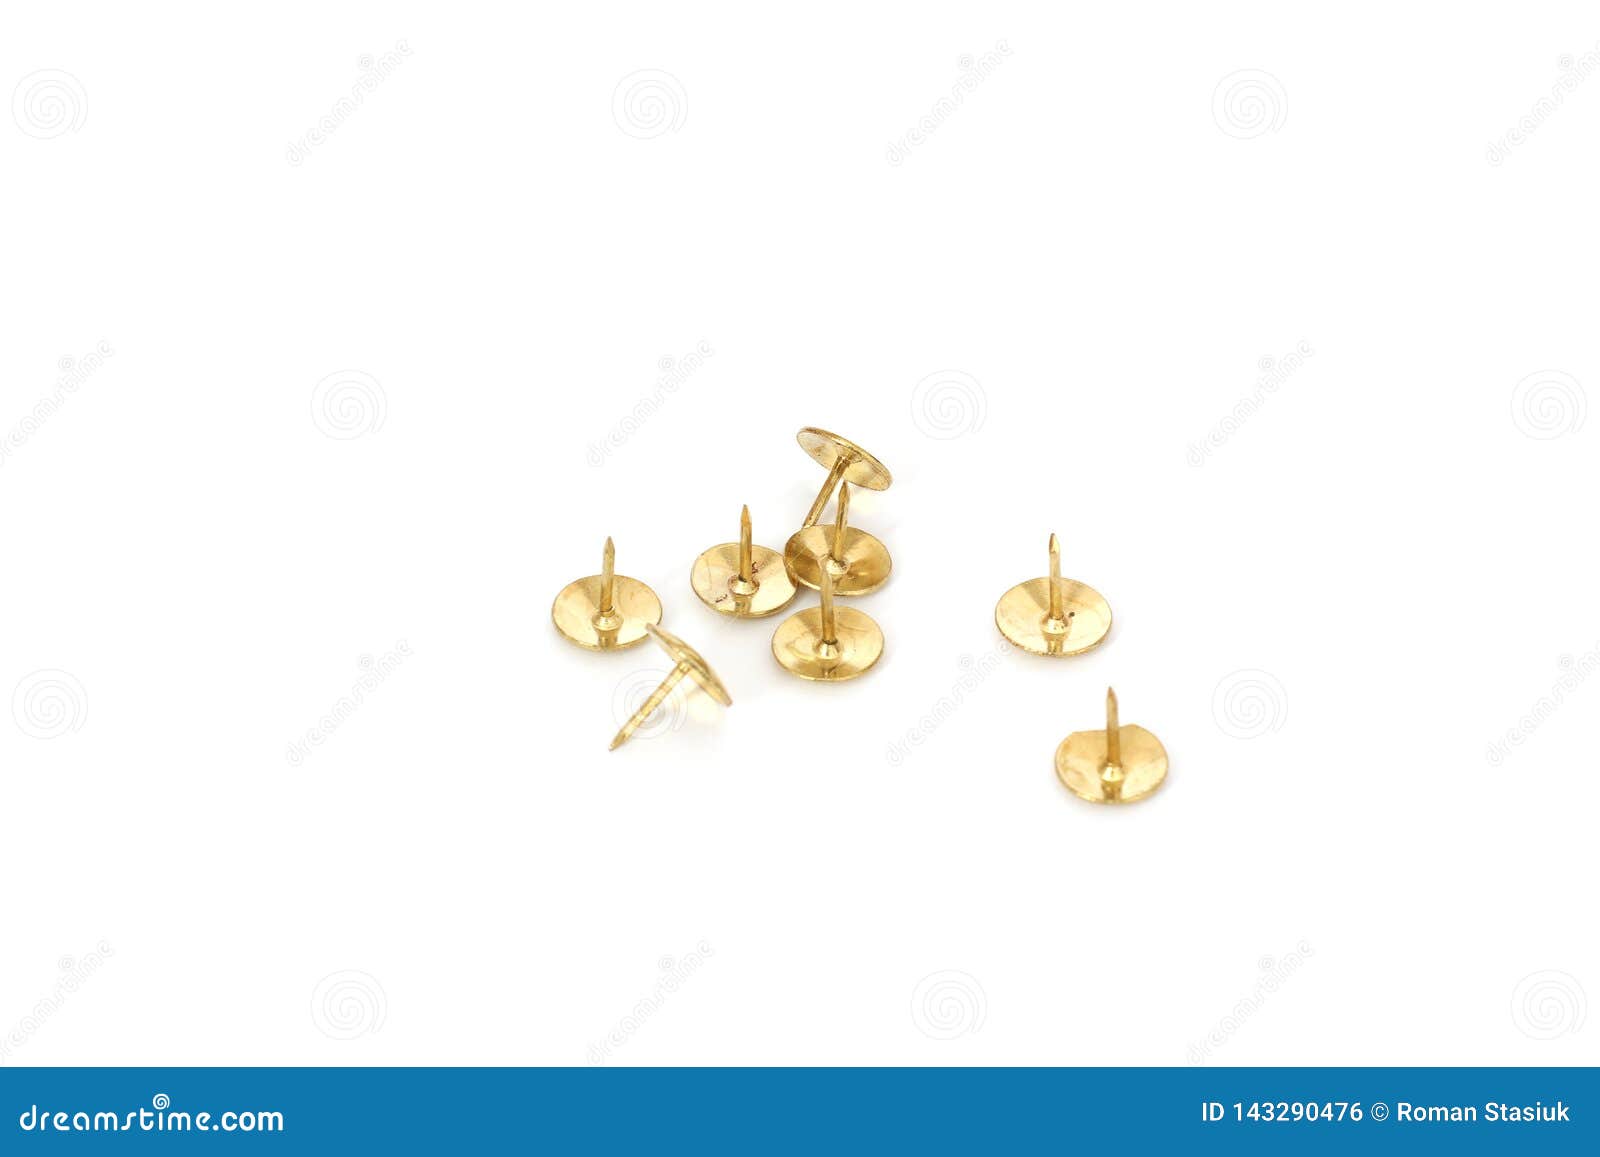 Push Pins on White Background Stock Photo - Image of metal, noticeboard ...